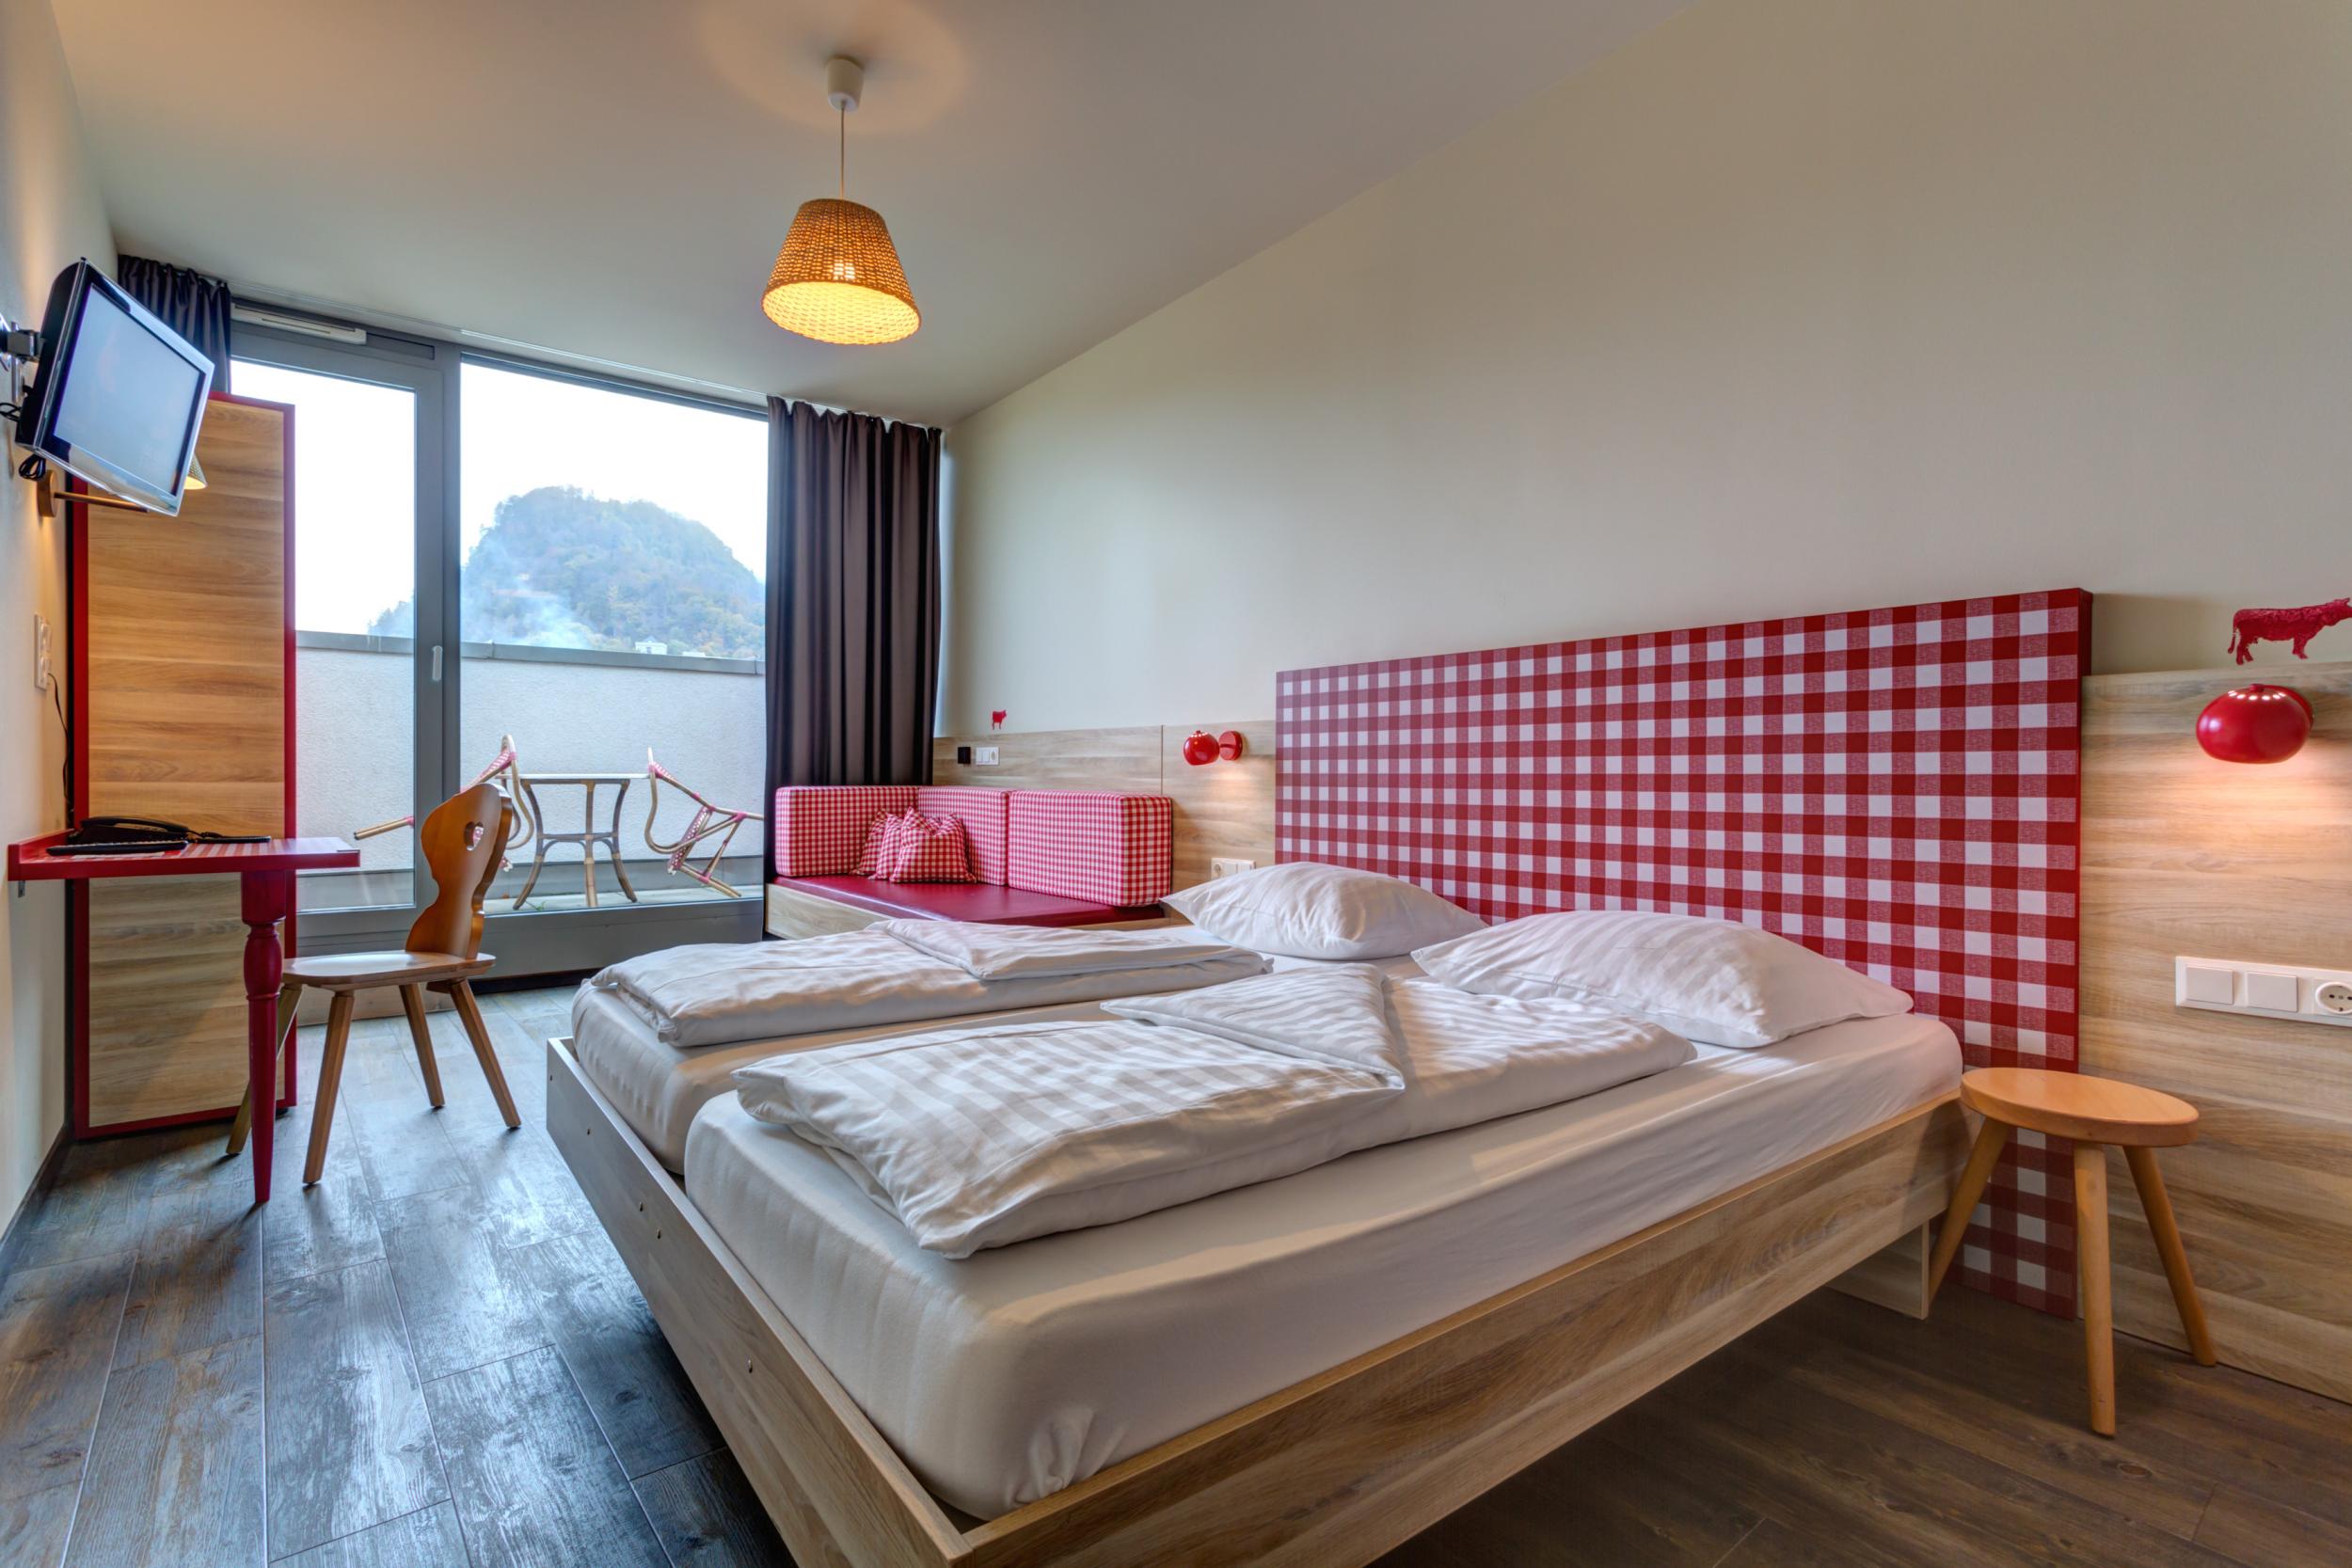 Hotel Meininger makes an excellent choice for travellers on a budget